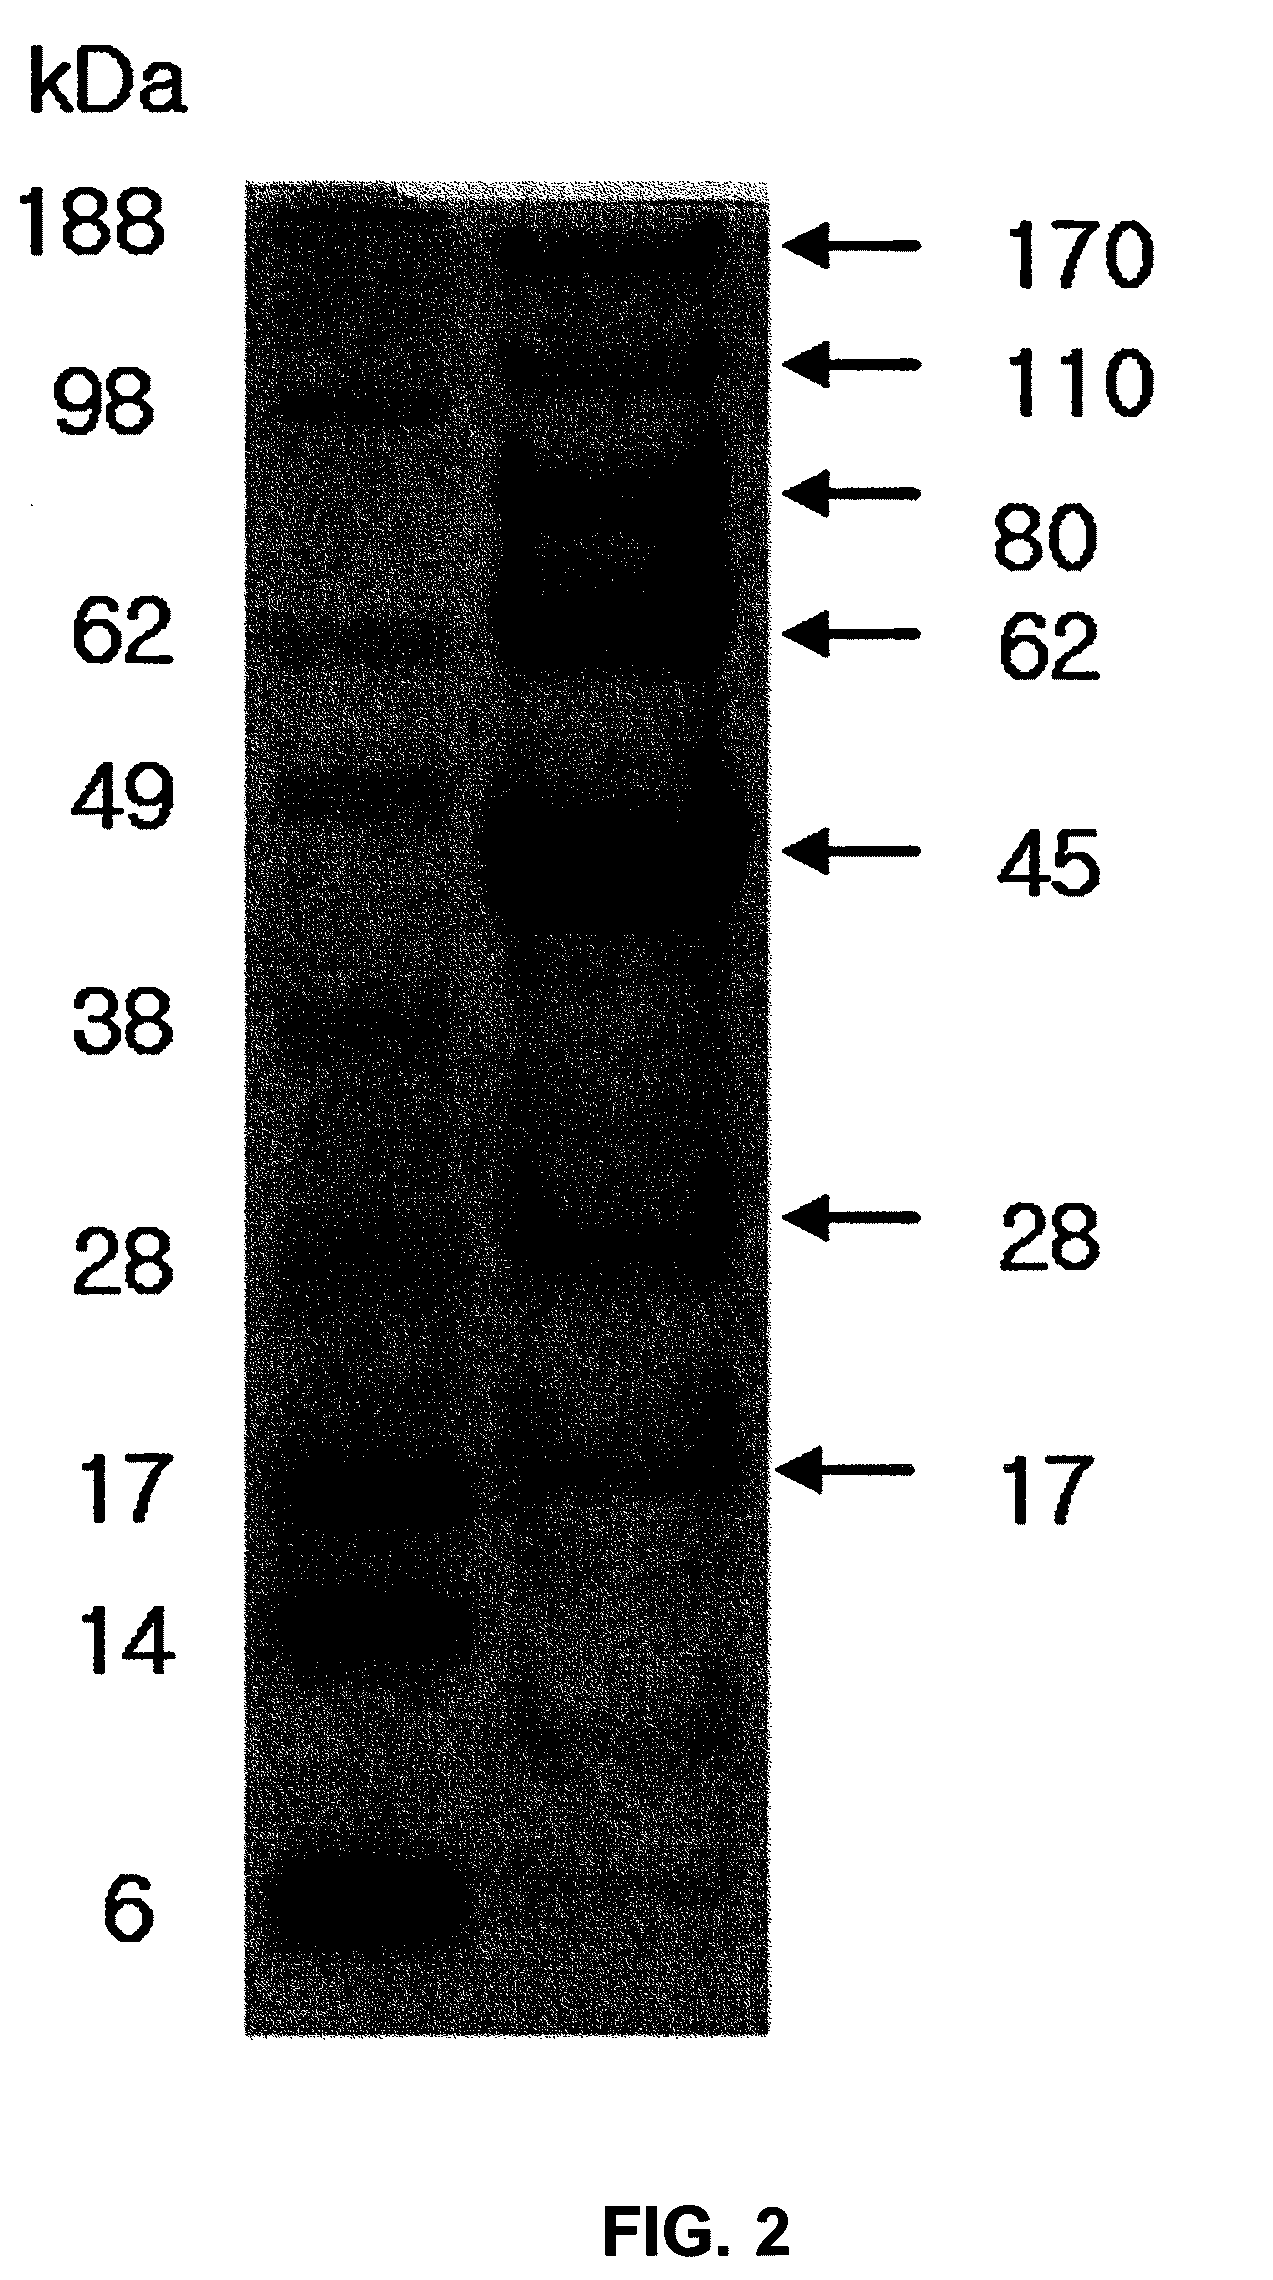 Novel Bacteriophage and Antibacterial Composition Comprising the Same